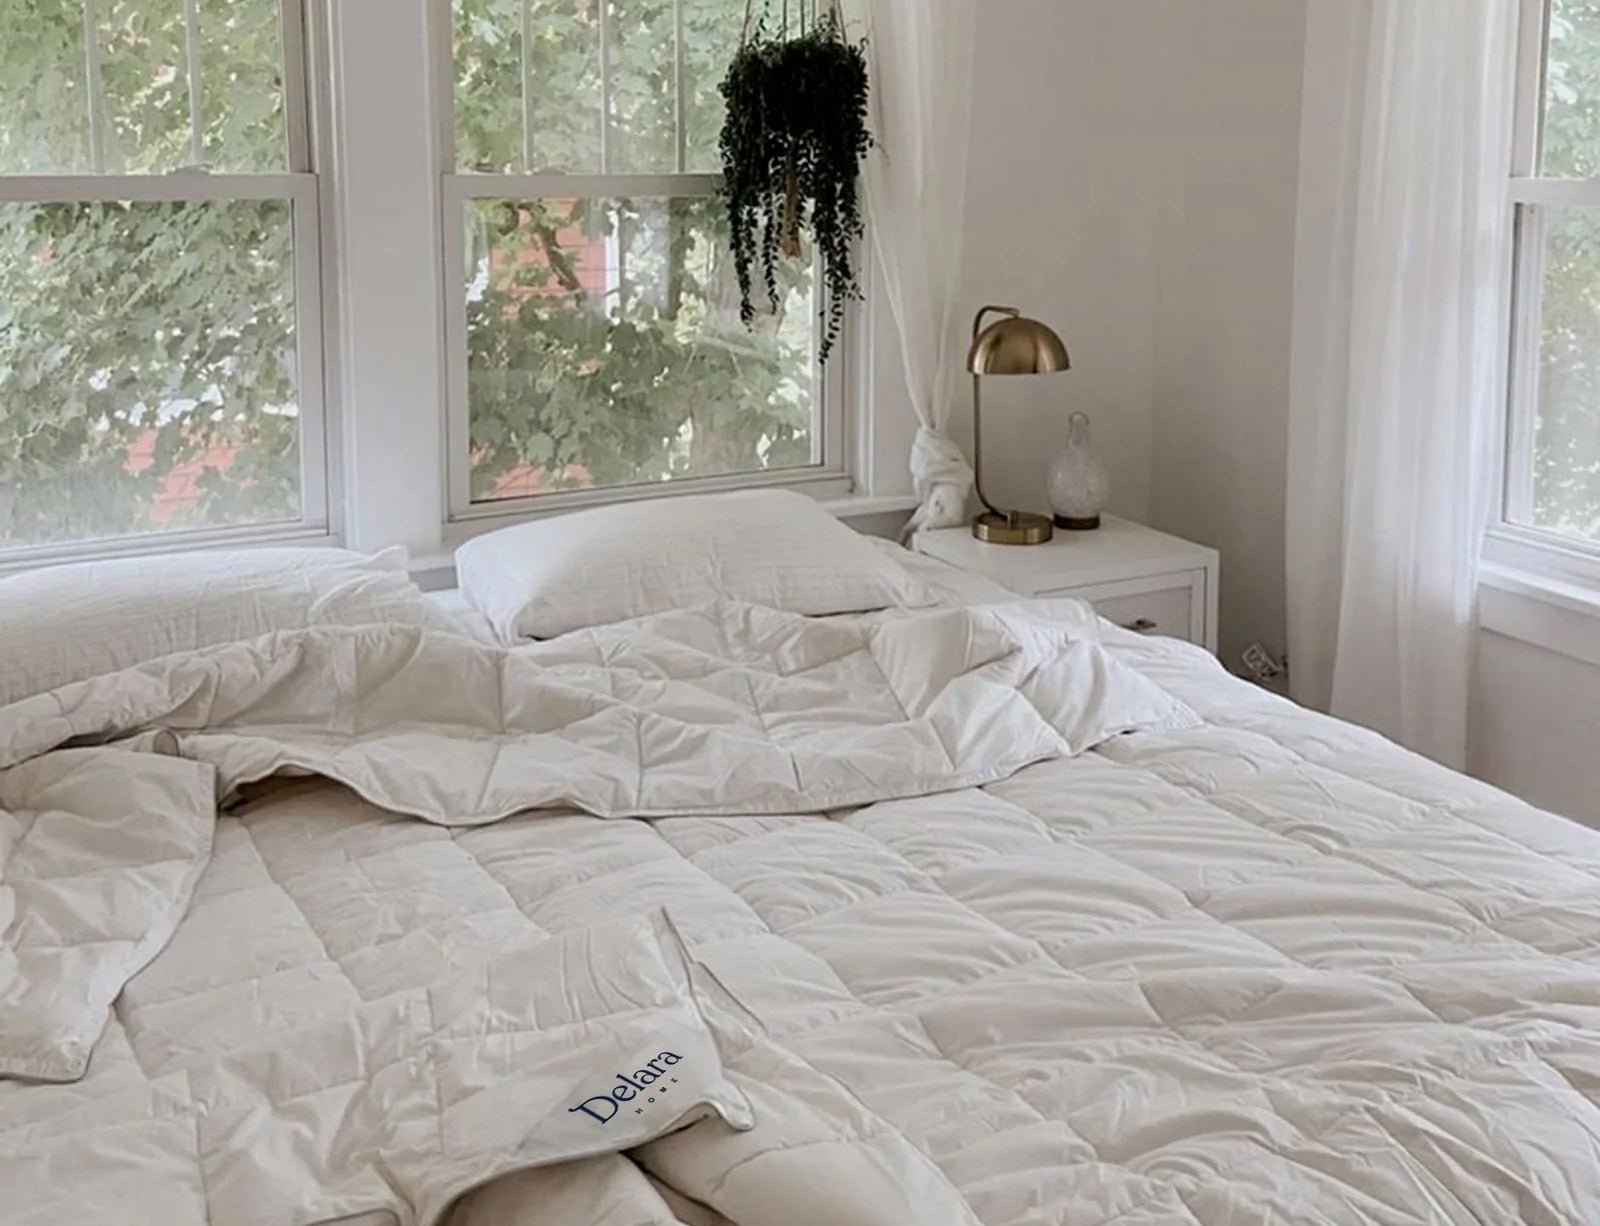 How to Choose a Breathable Comforter (& Why it Matters) – Delara